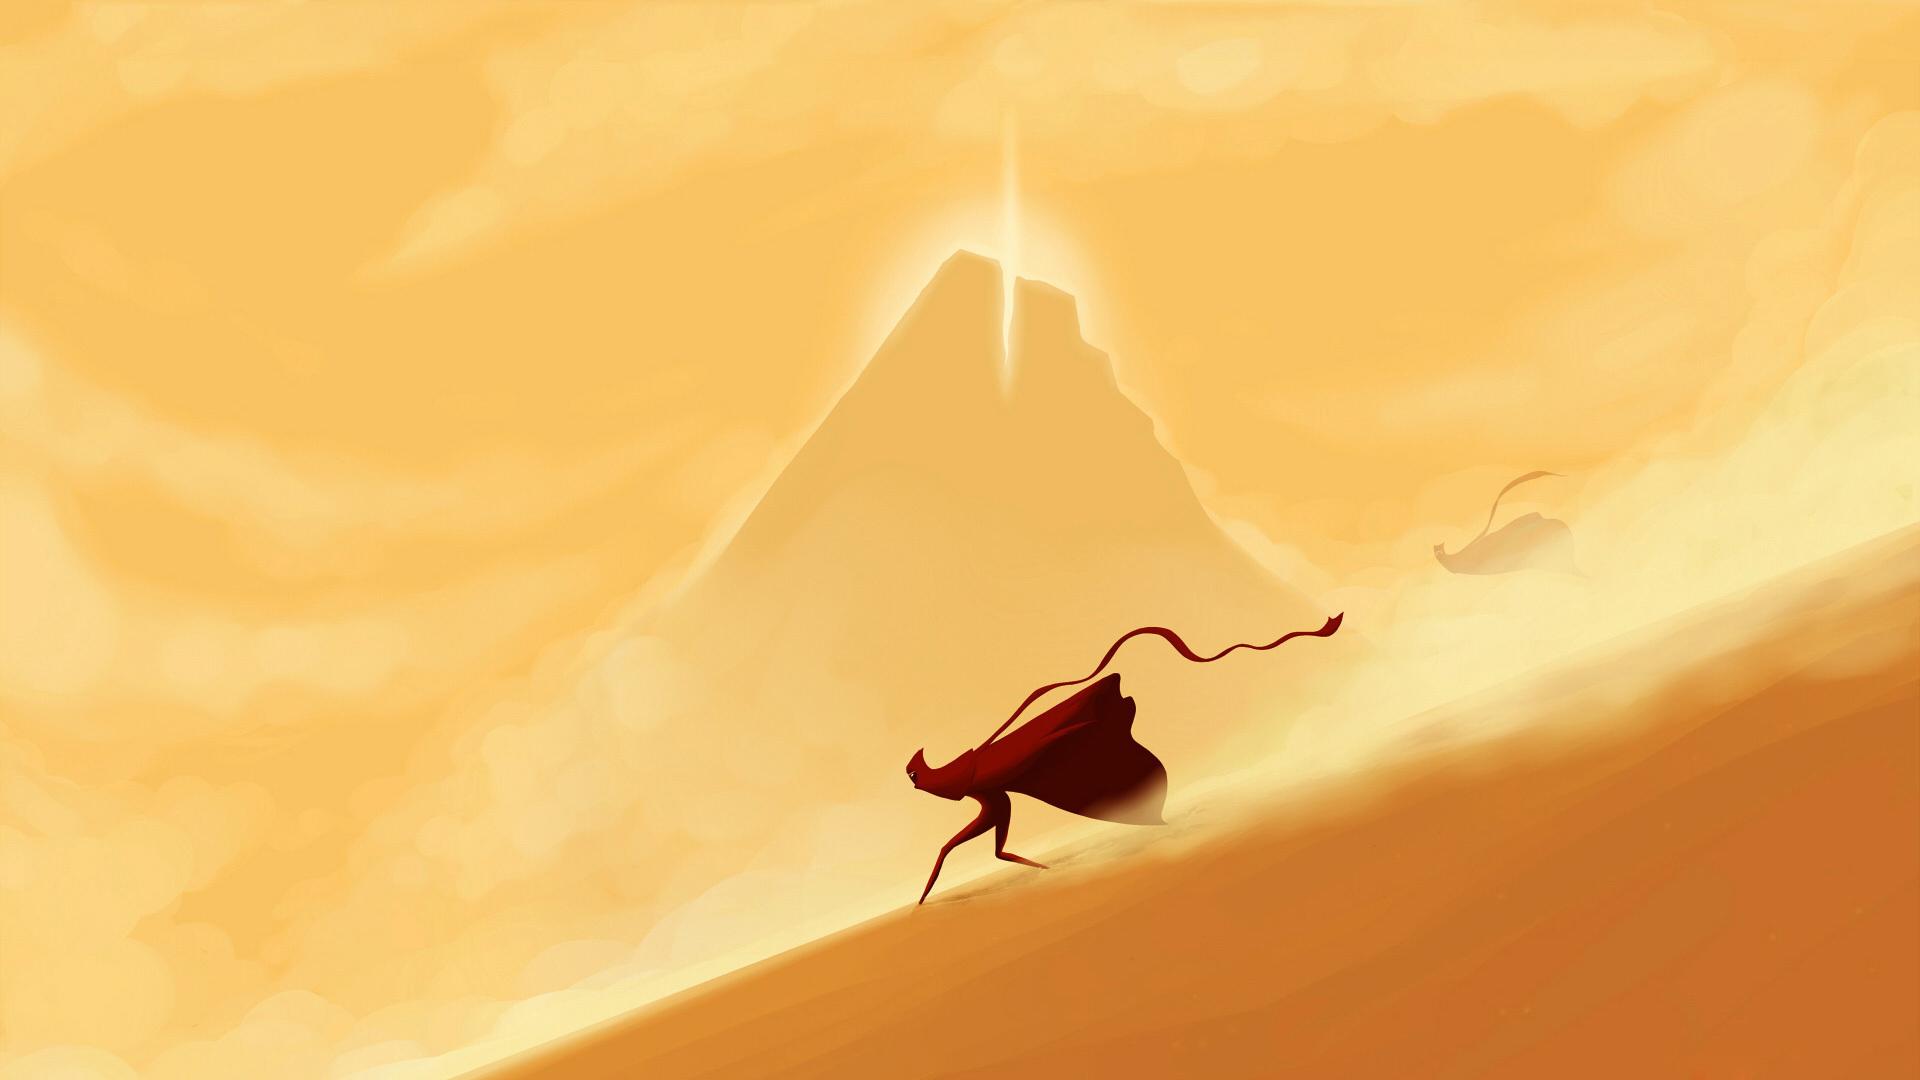 journey game images